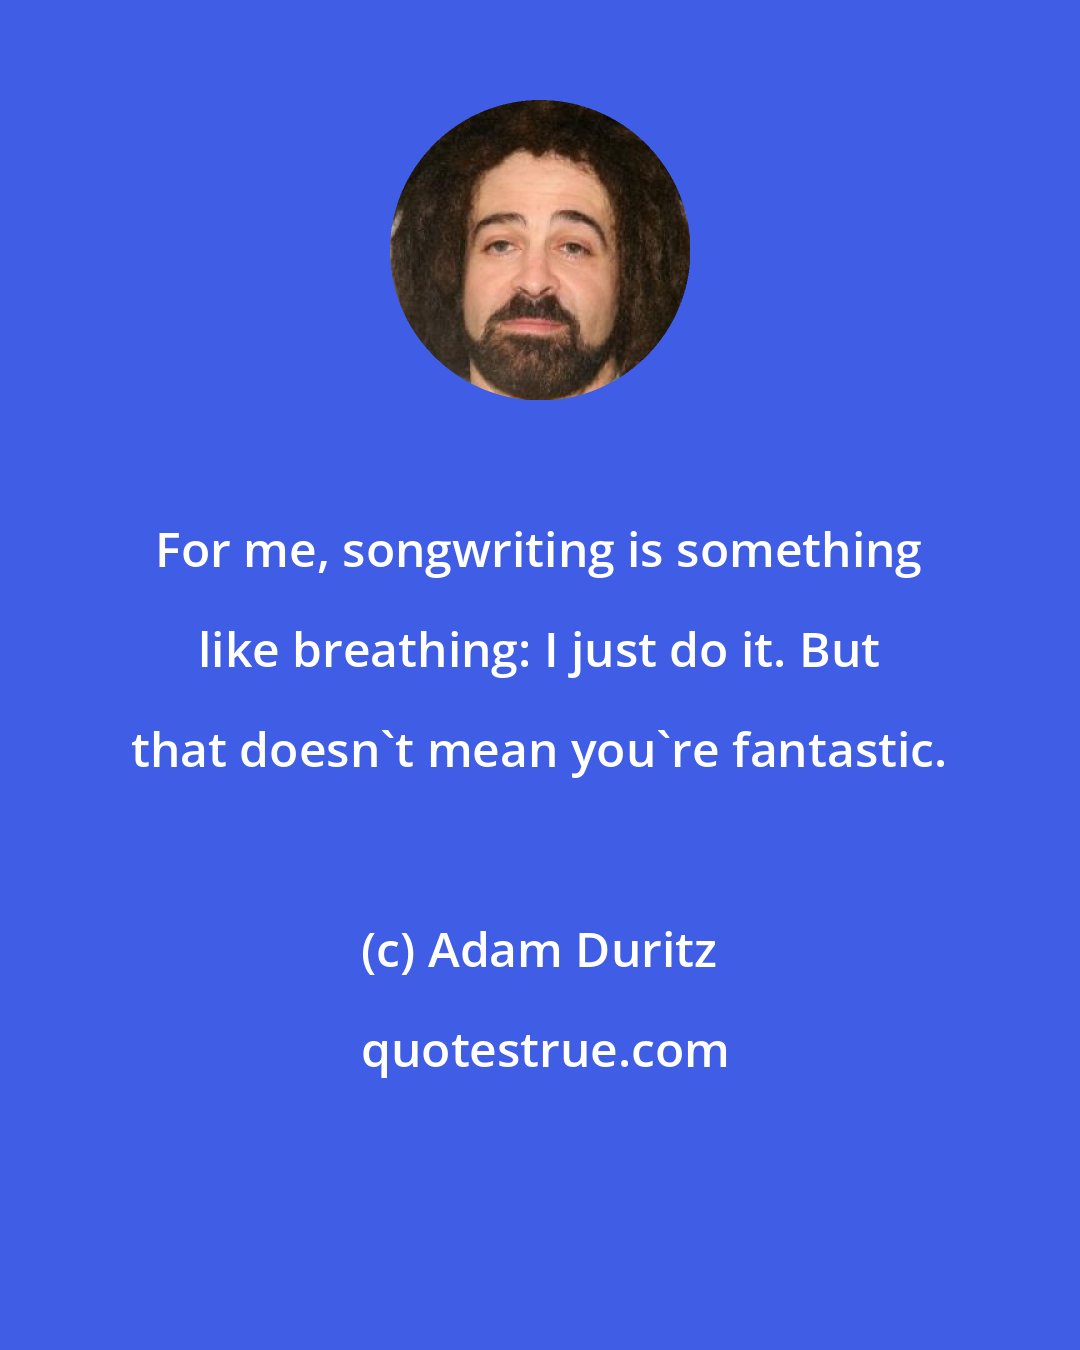 Adam Duritz: For me, songwriting is something like breathing: I just do it. But that doesn't mean you're fantastic.